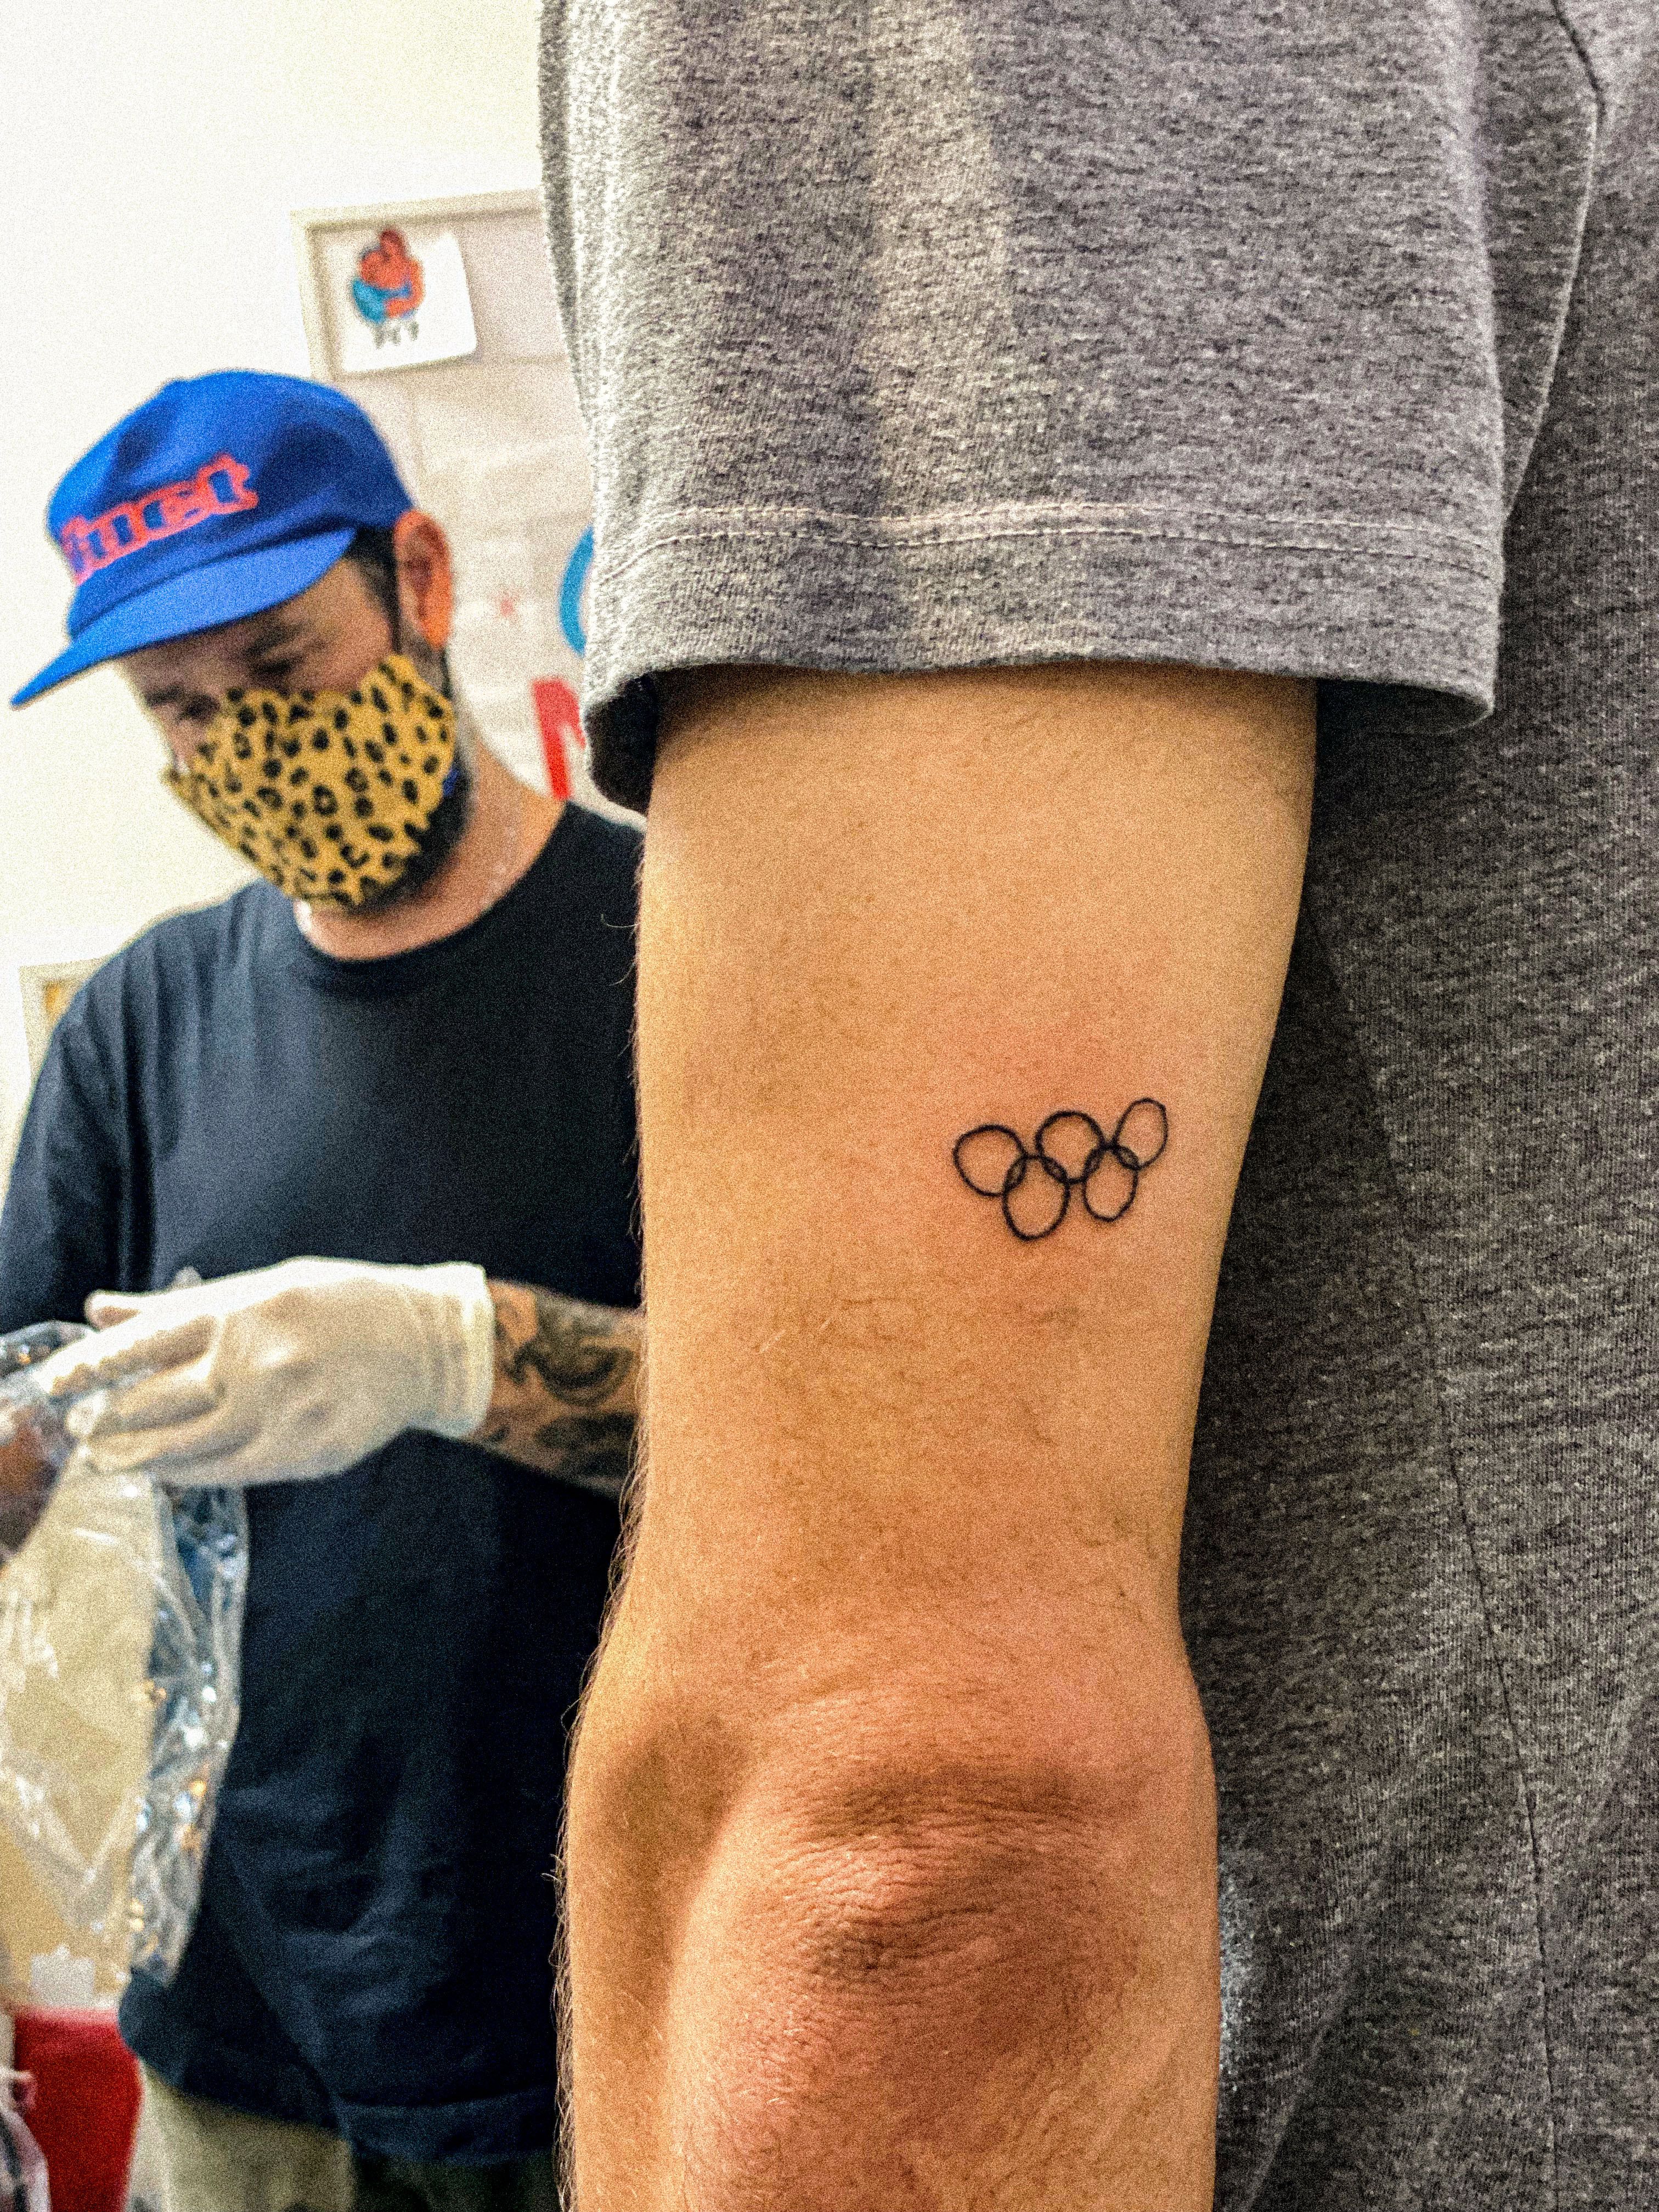 North Wales men's Olympic tattoo shows Team GB medal tally - North Wales  Live